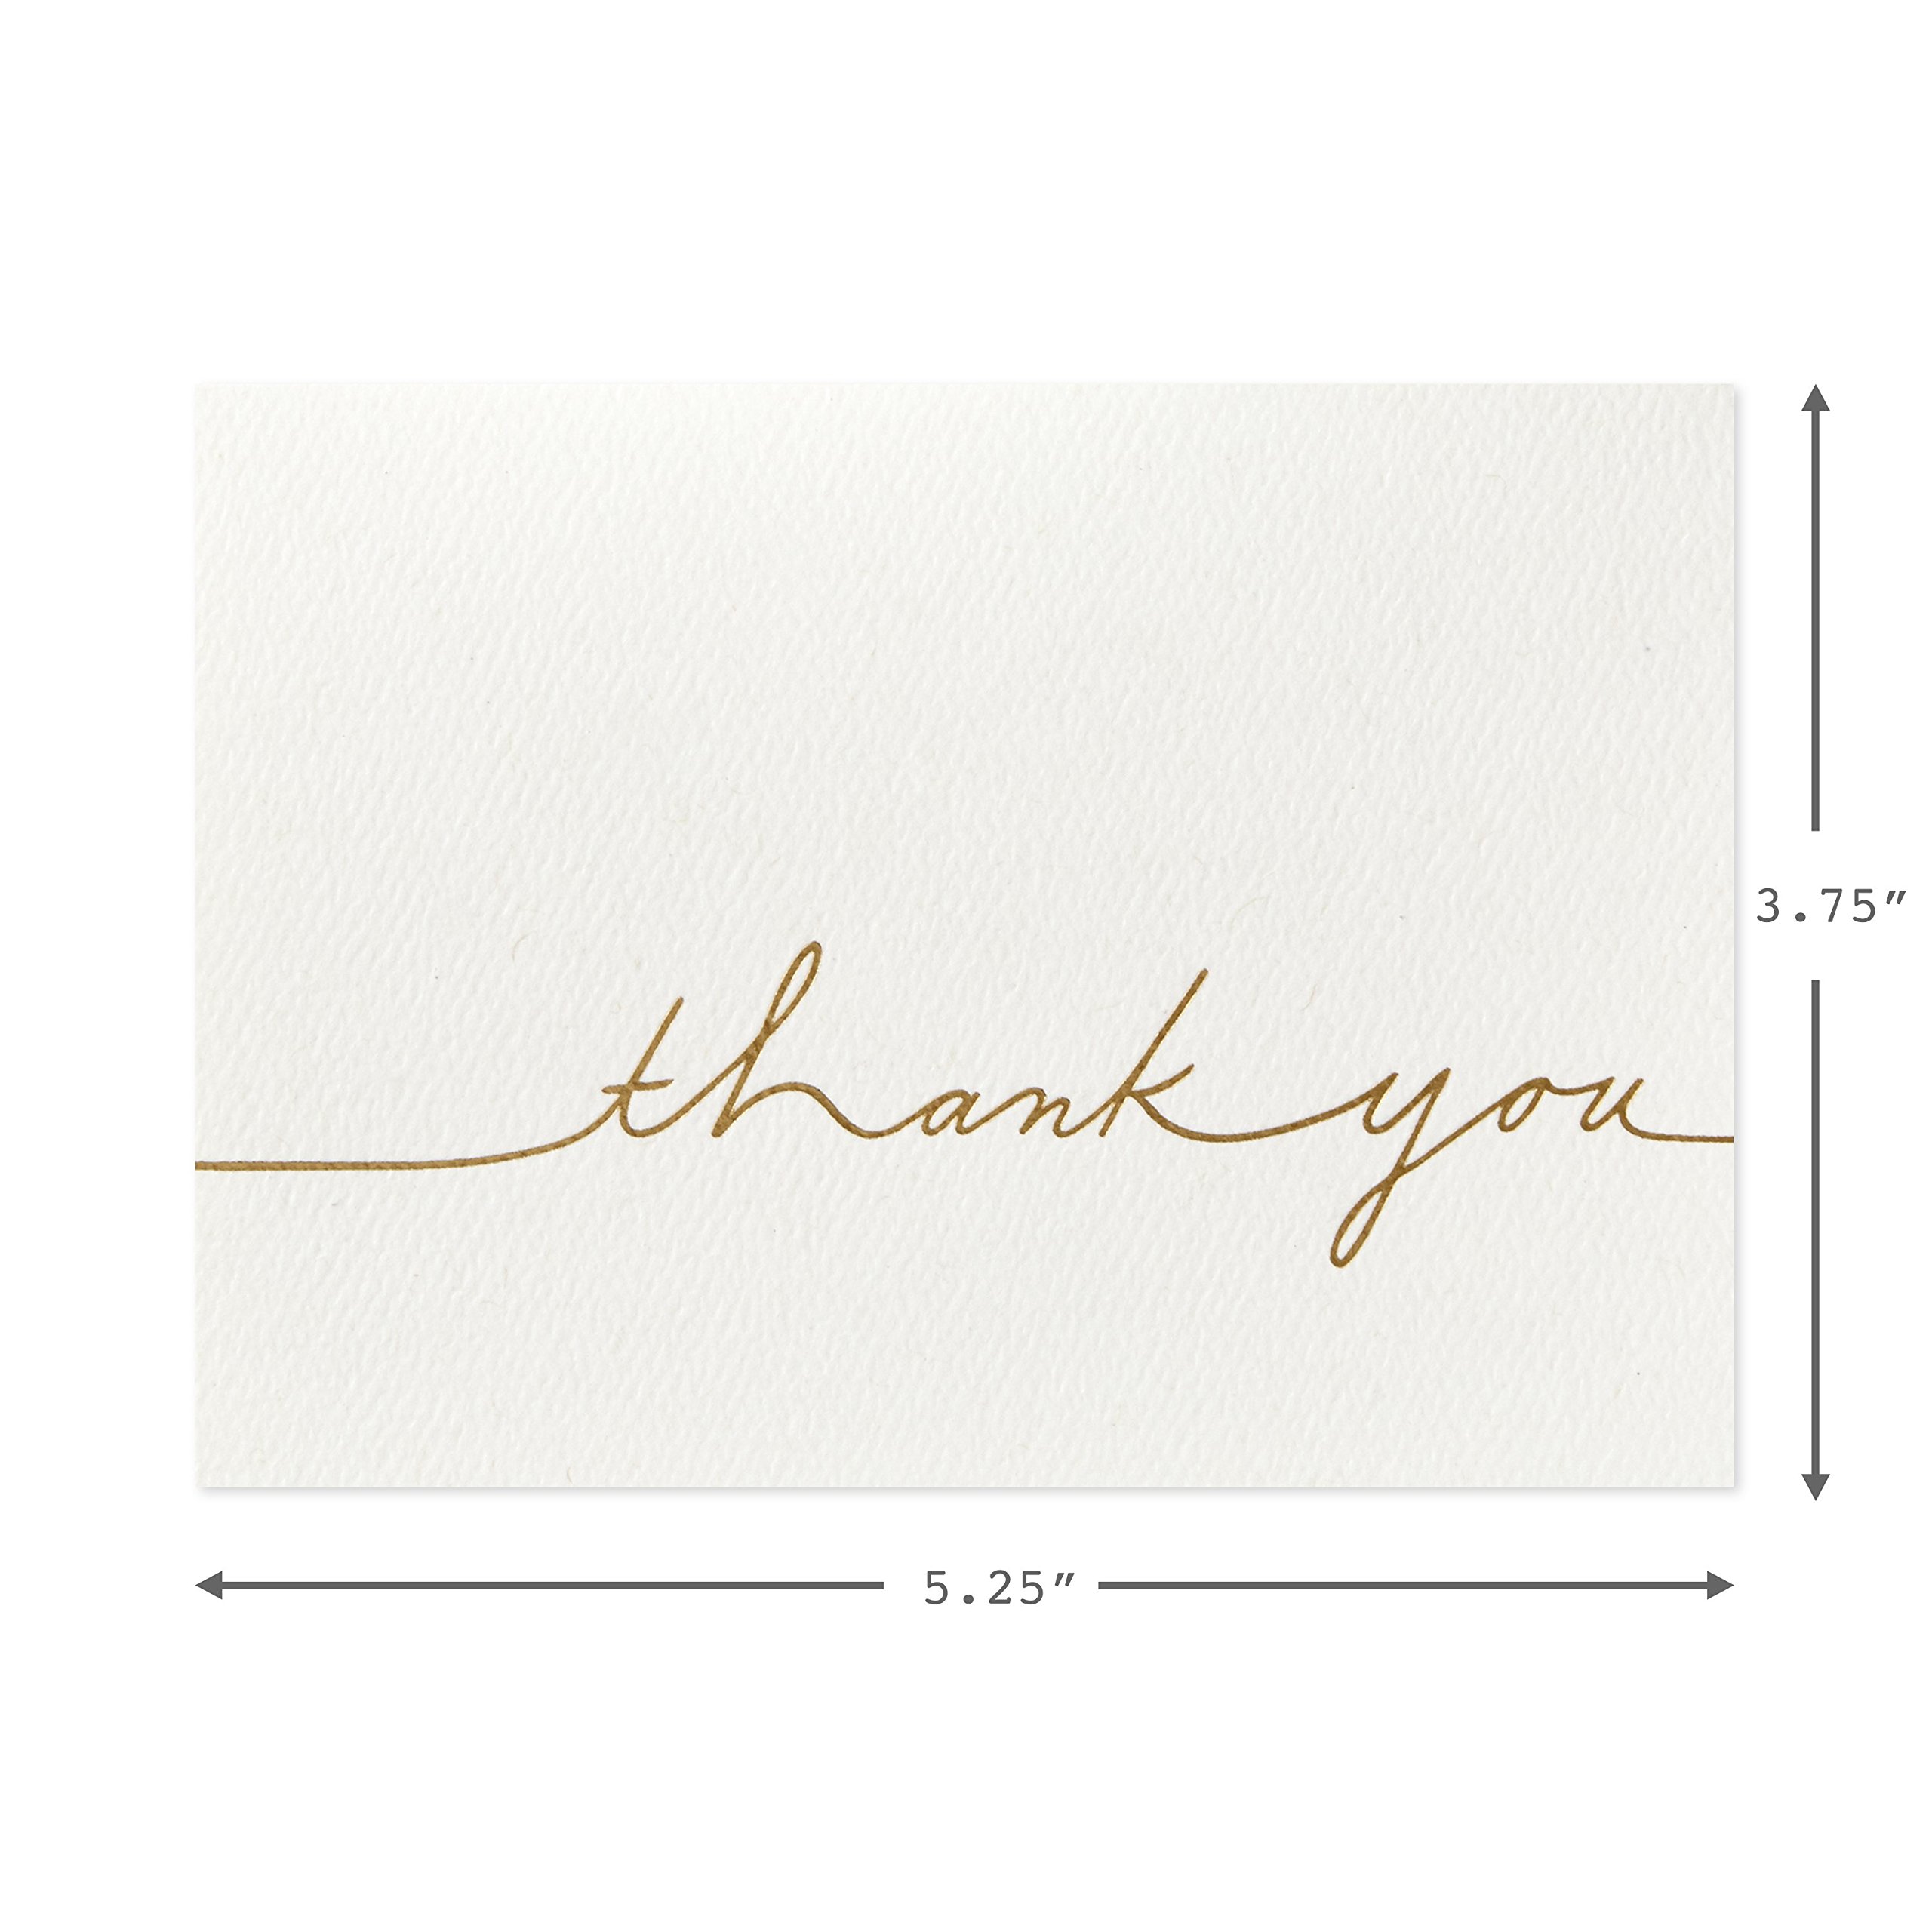 Hallmark Signature Gold Thank You Cards, Gold Script (10 Cards with Envelopes)